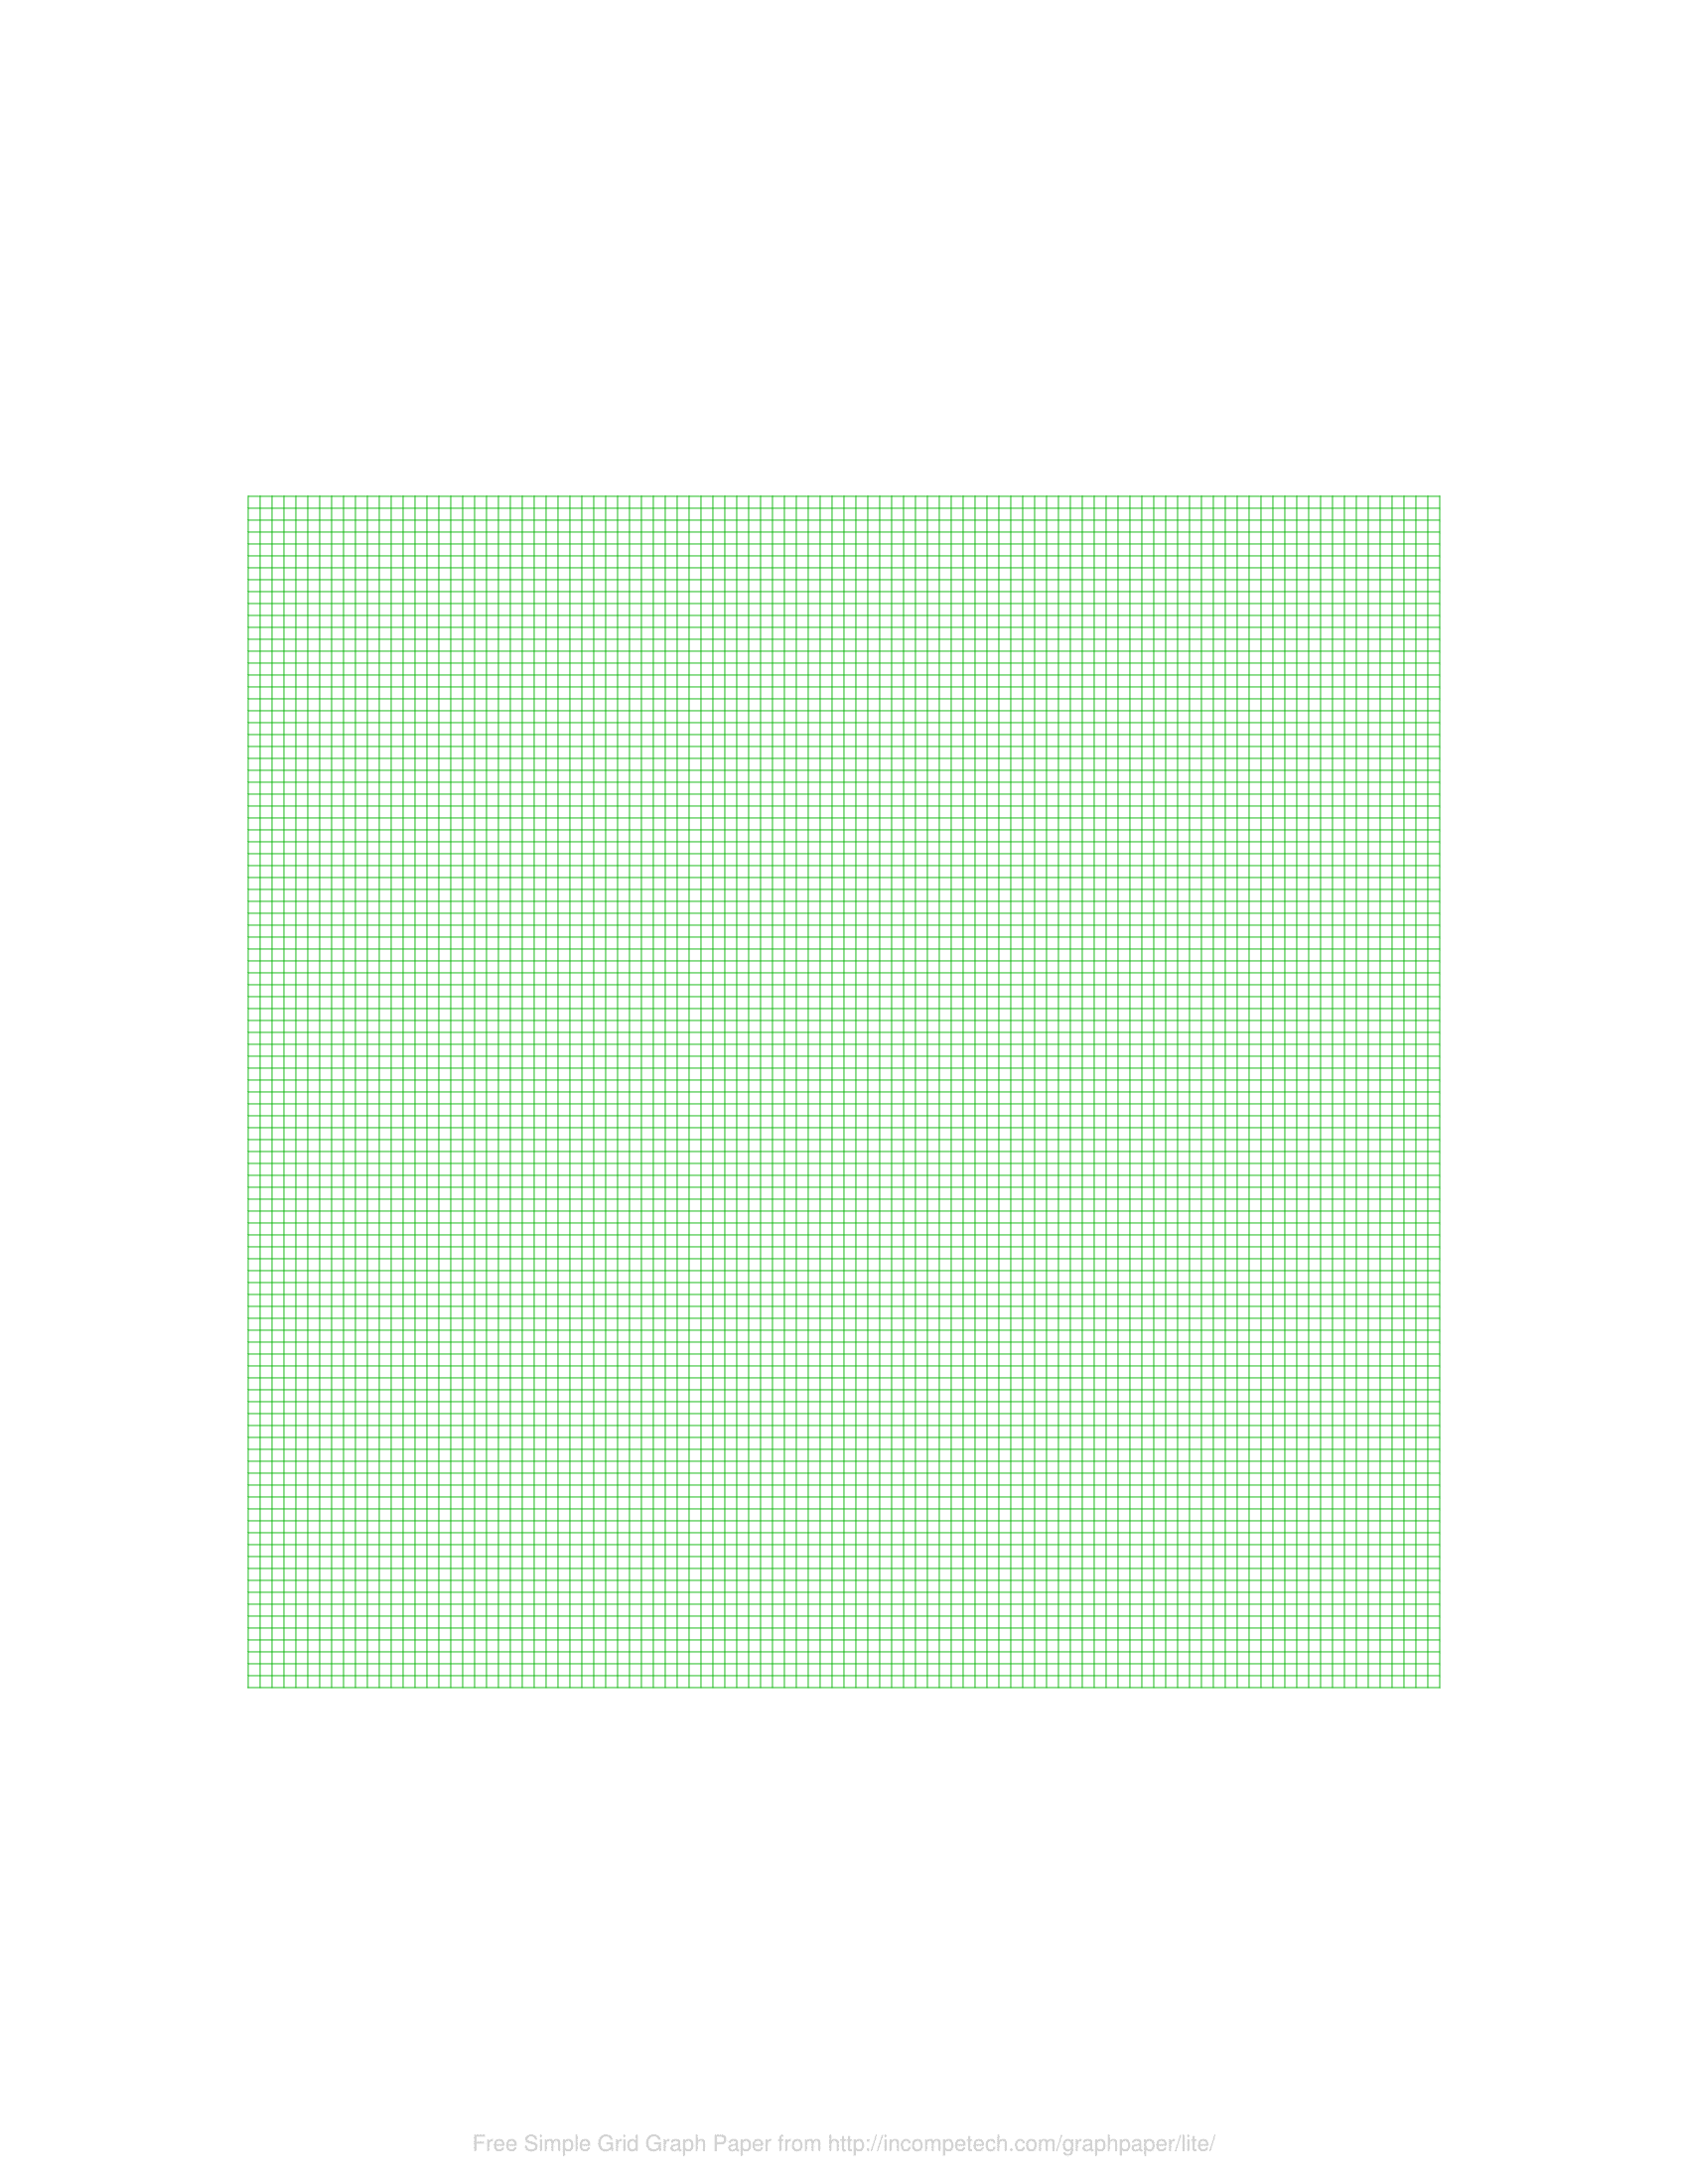 Free Online Graph Paper / Simple Grid